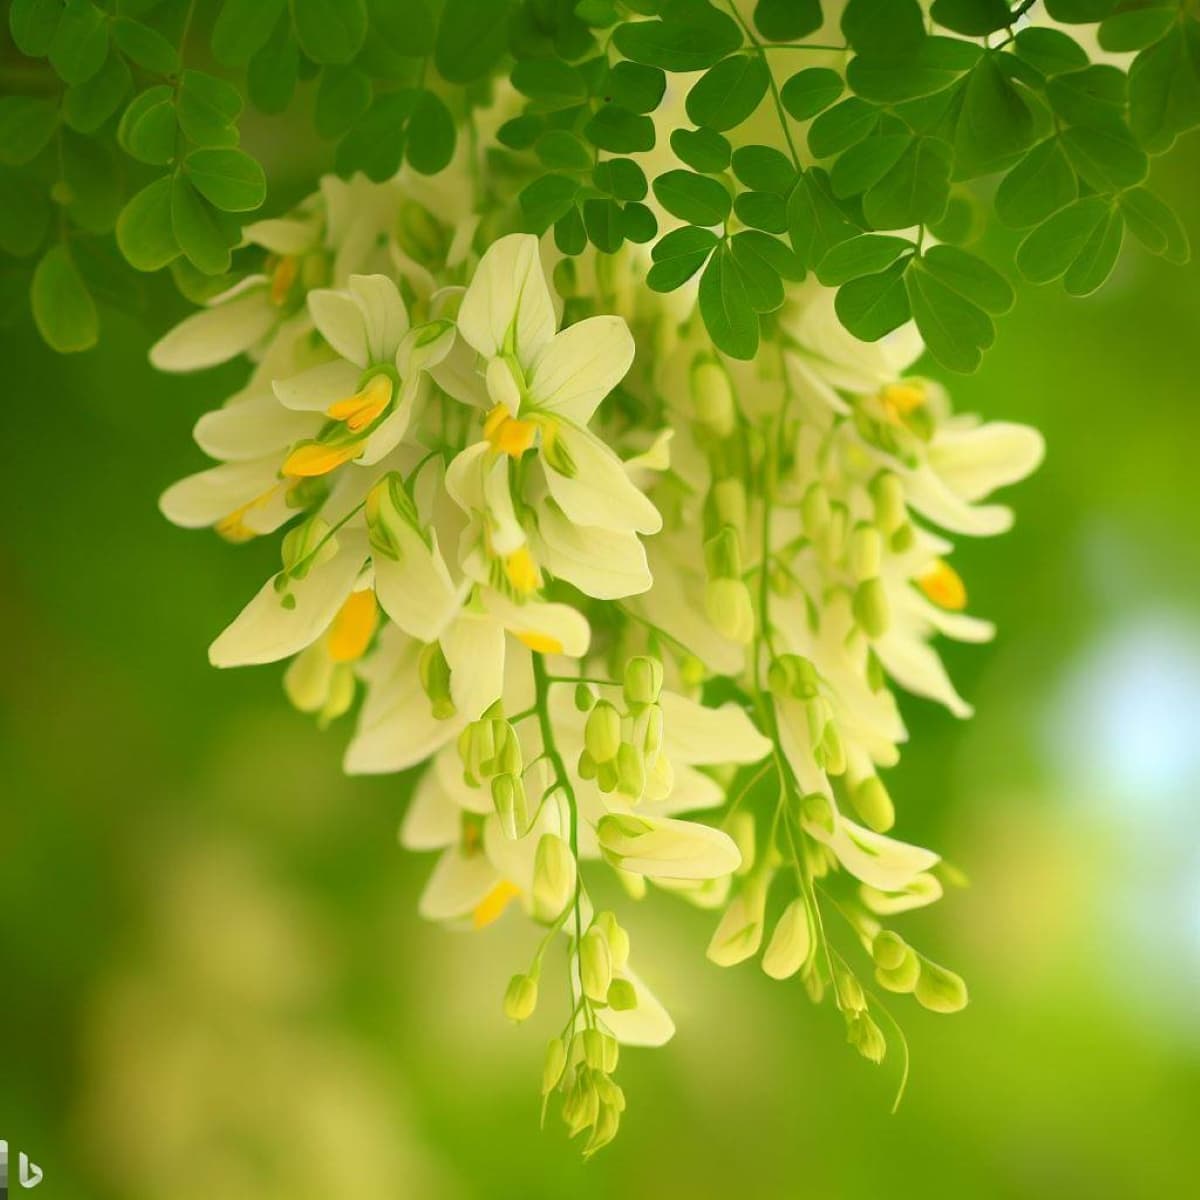 Moringa Flowers with Leaves